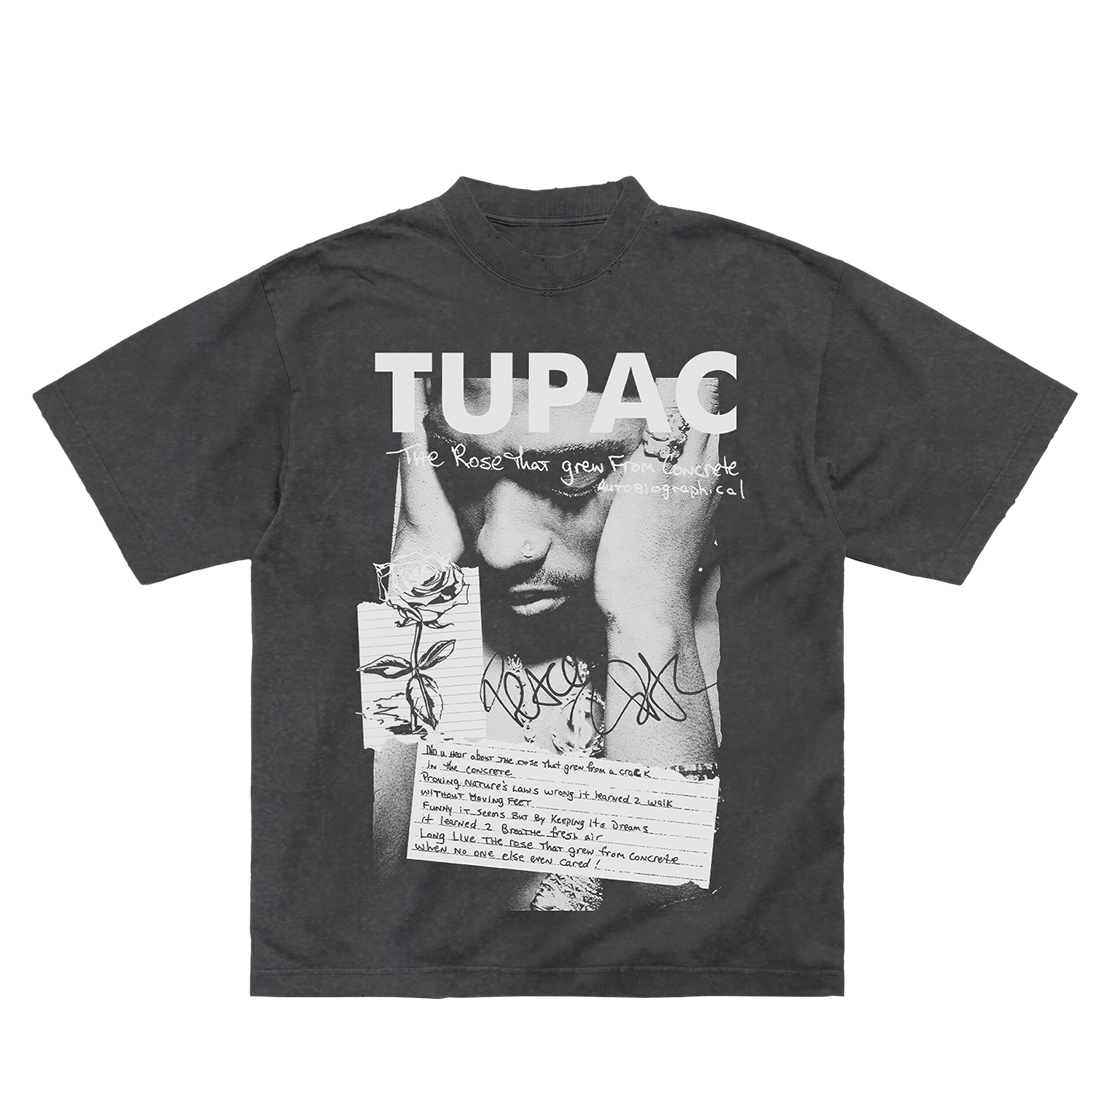 2Pac - The Rose Charcoal T-Shirt